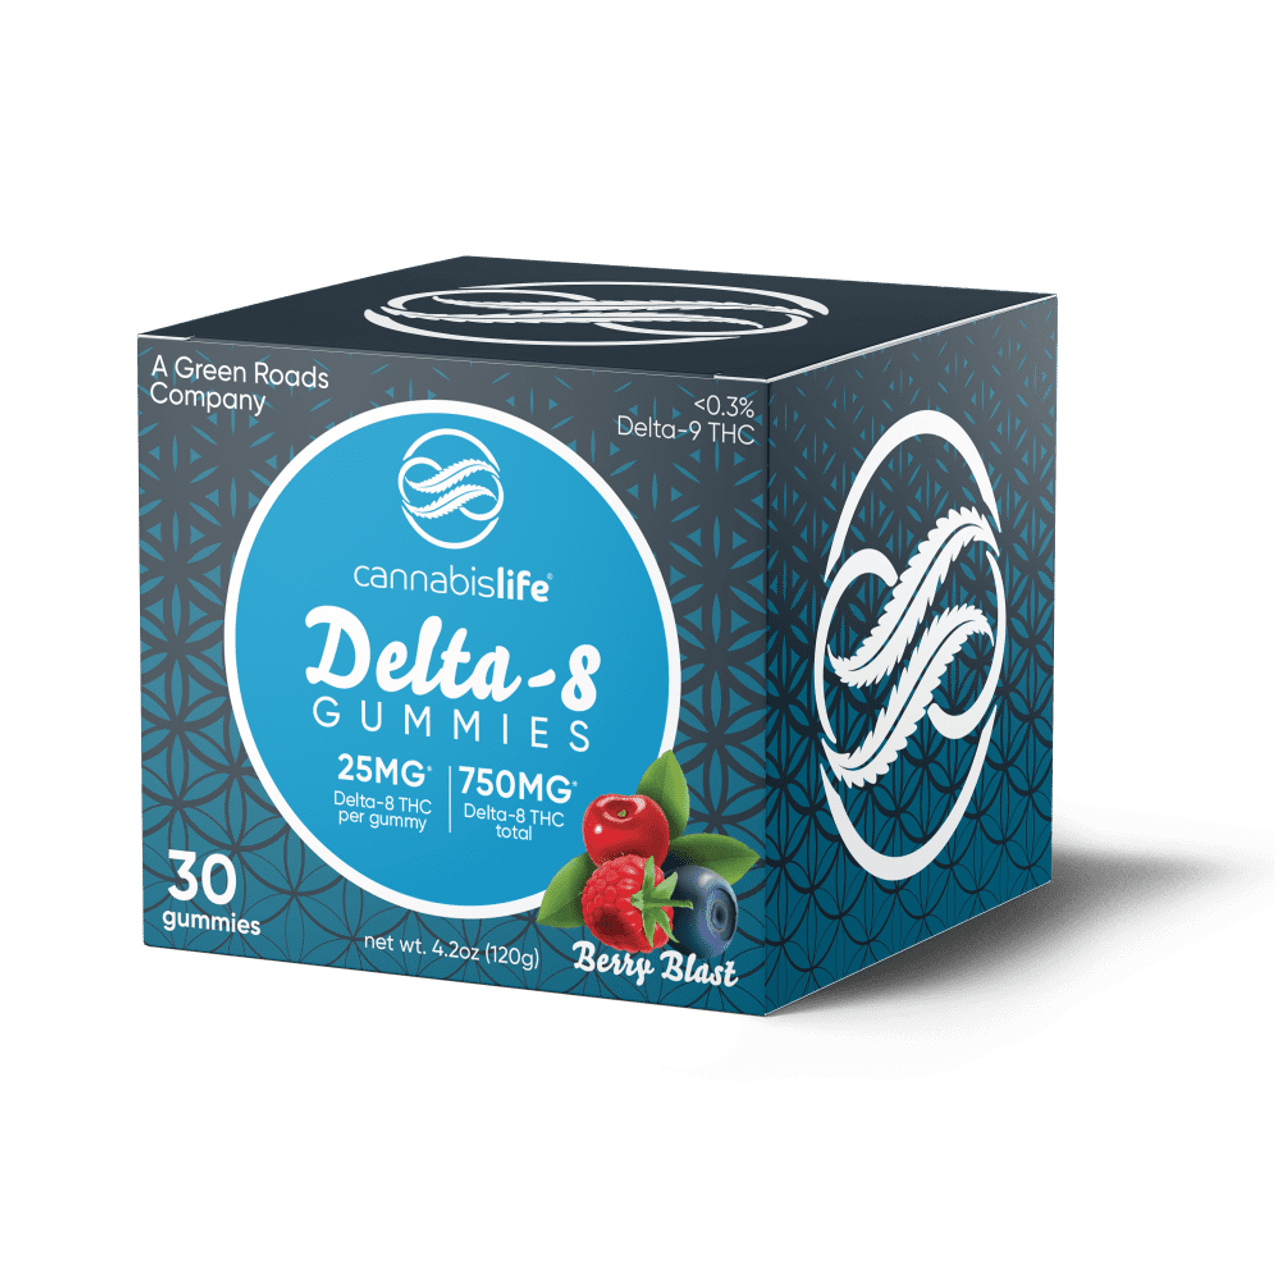 Delta 8 THC Gummies vs. CBD Gummies: What’s the Difference?